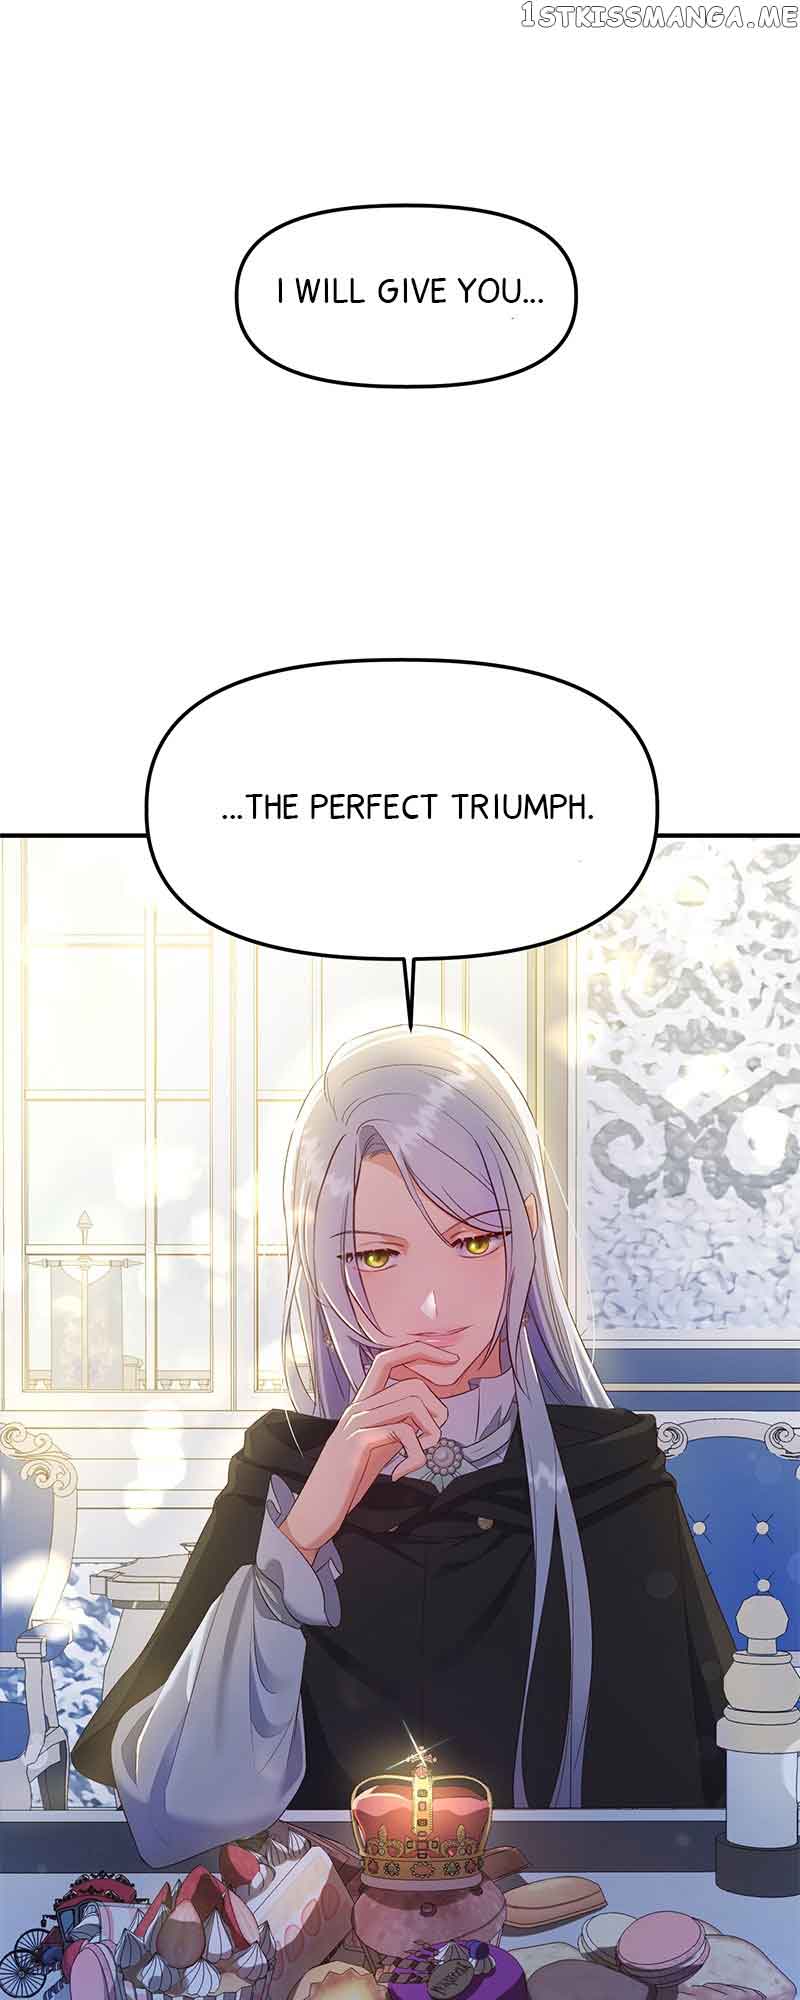 The Fake Duchess In Distresss chapter 6